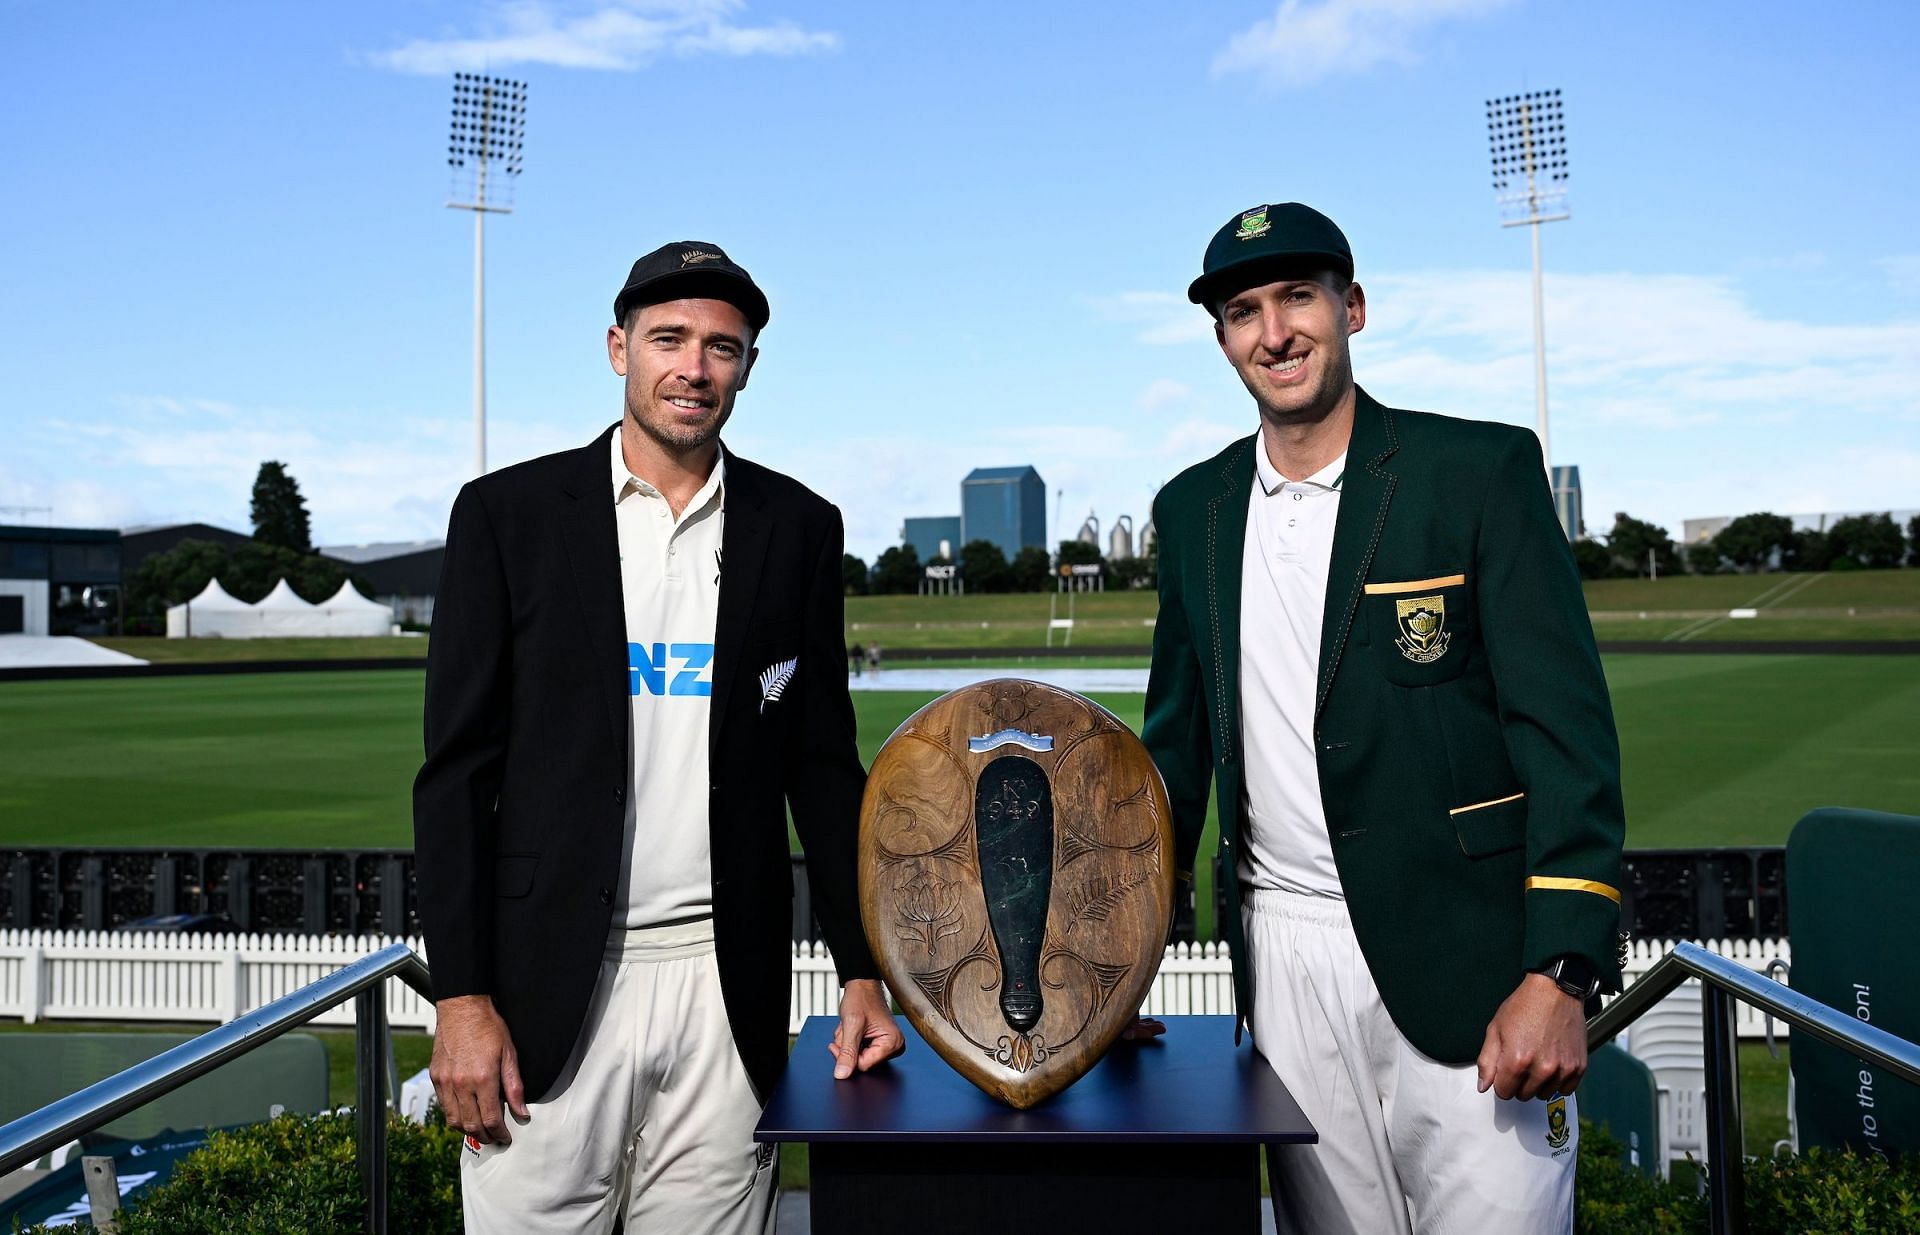 New Zealand vs South Africa Test Dream11 Fantasy Suggestions